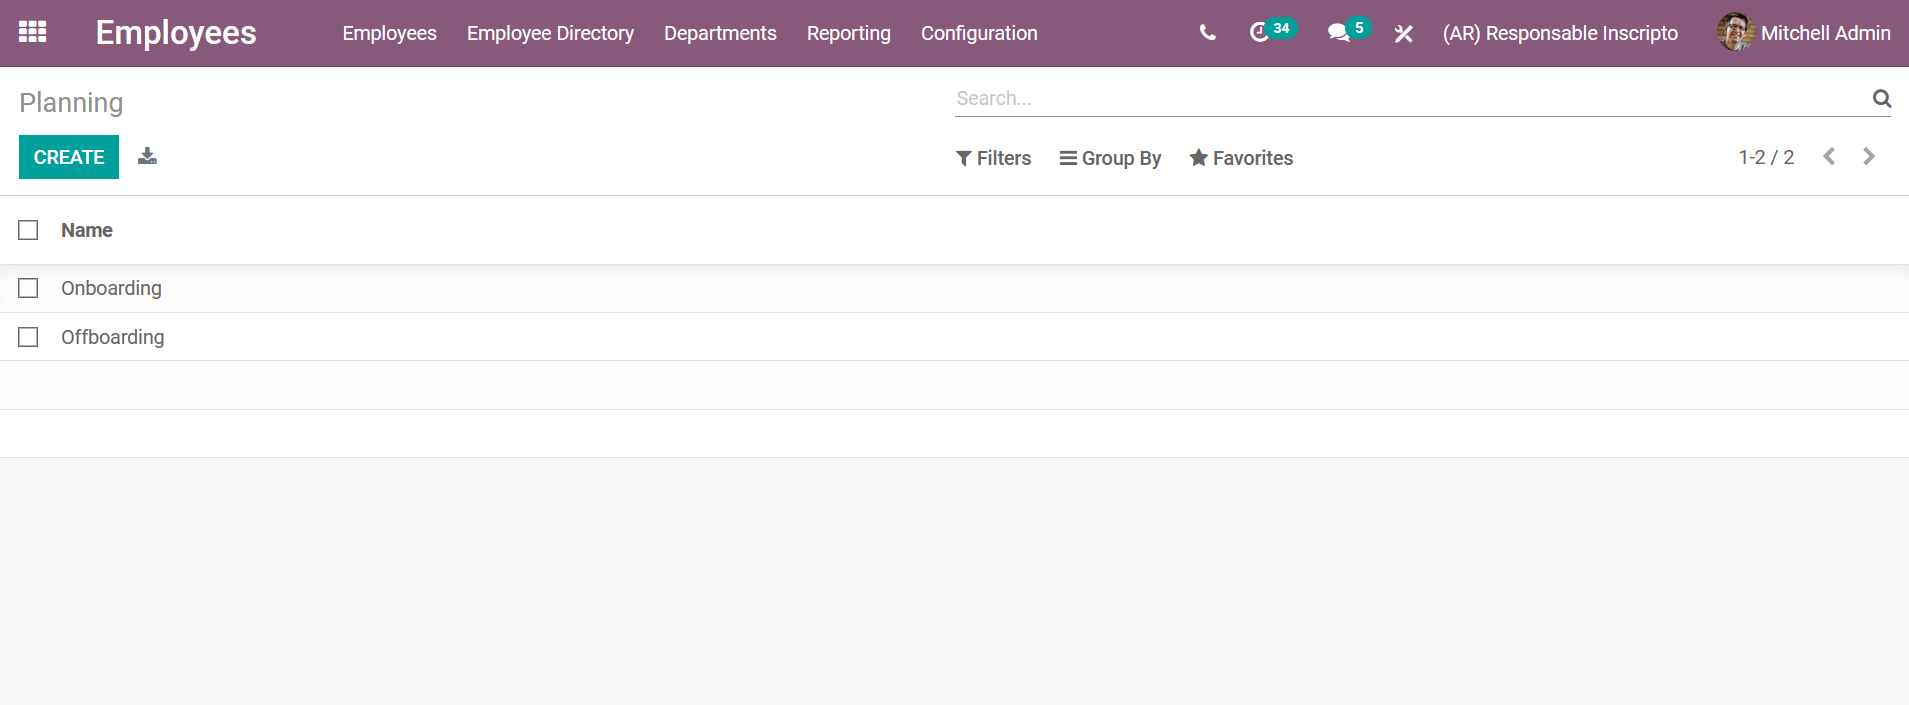 Overview of the Onboarding and Offboarding Plans Page in the Odoo Employees Module